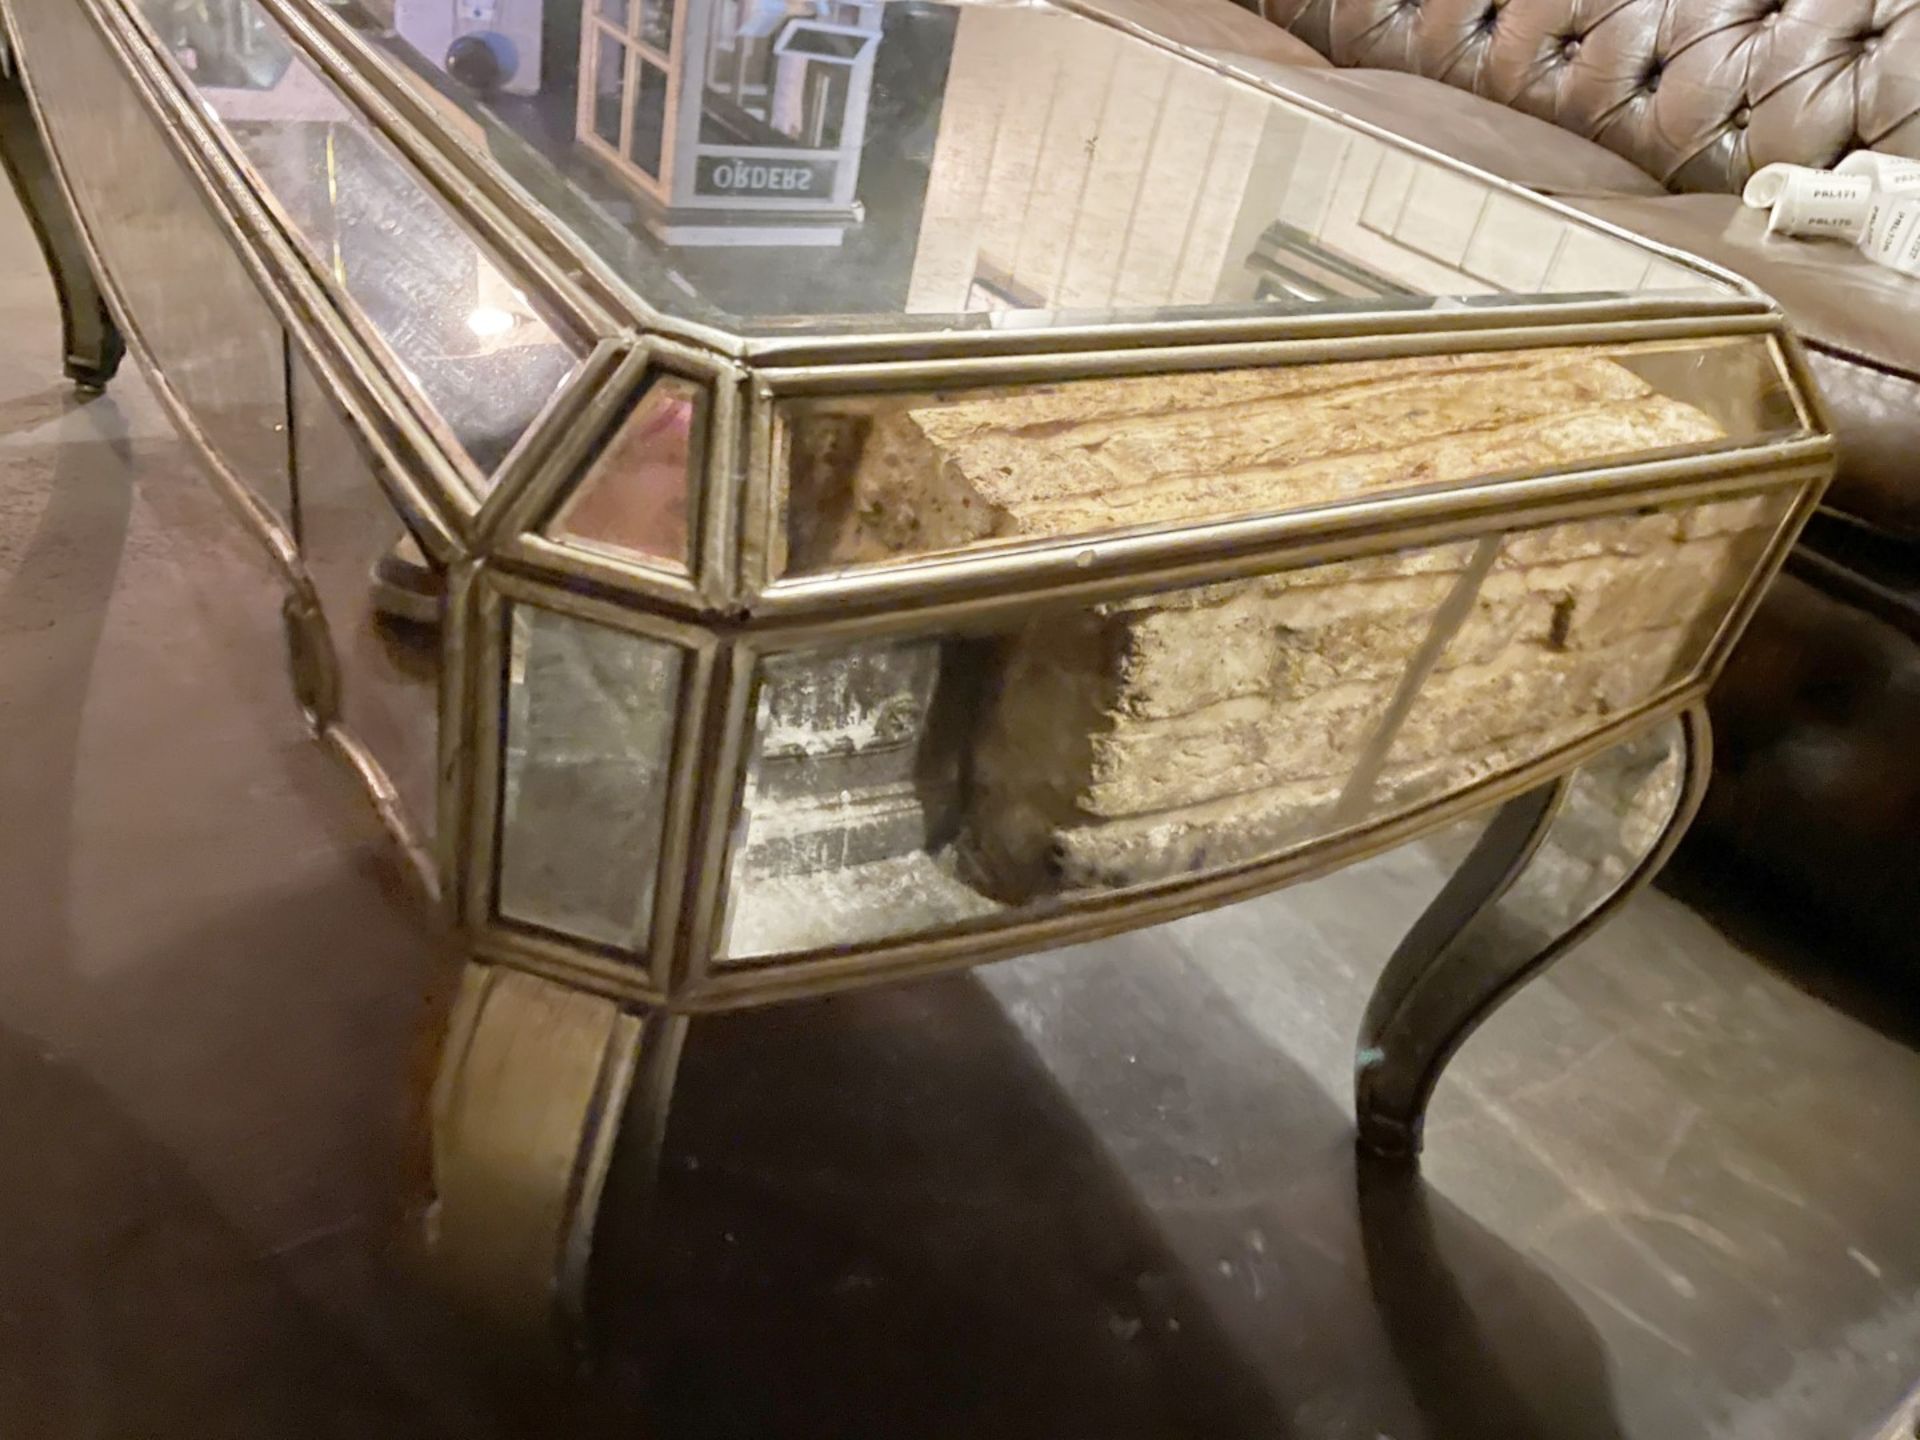 1 x Vintage French-style Mirrored Rectangular Cocktail Coffee Table with an Aged Aesthetic - Image 9 of 10